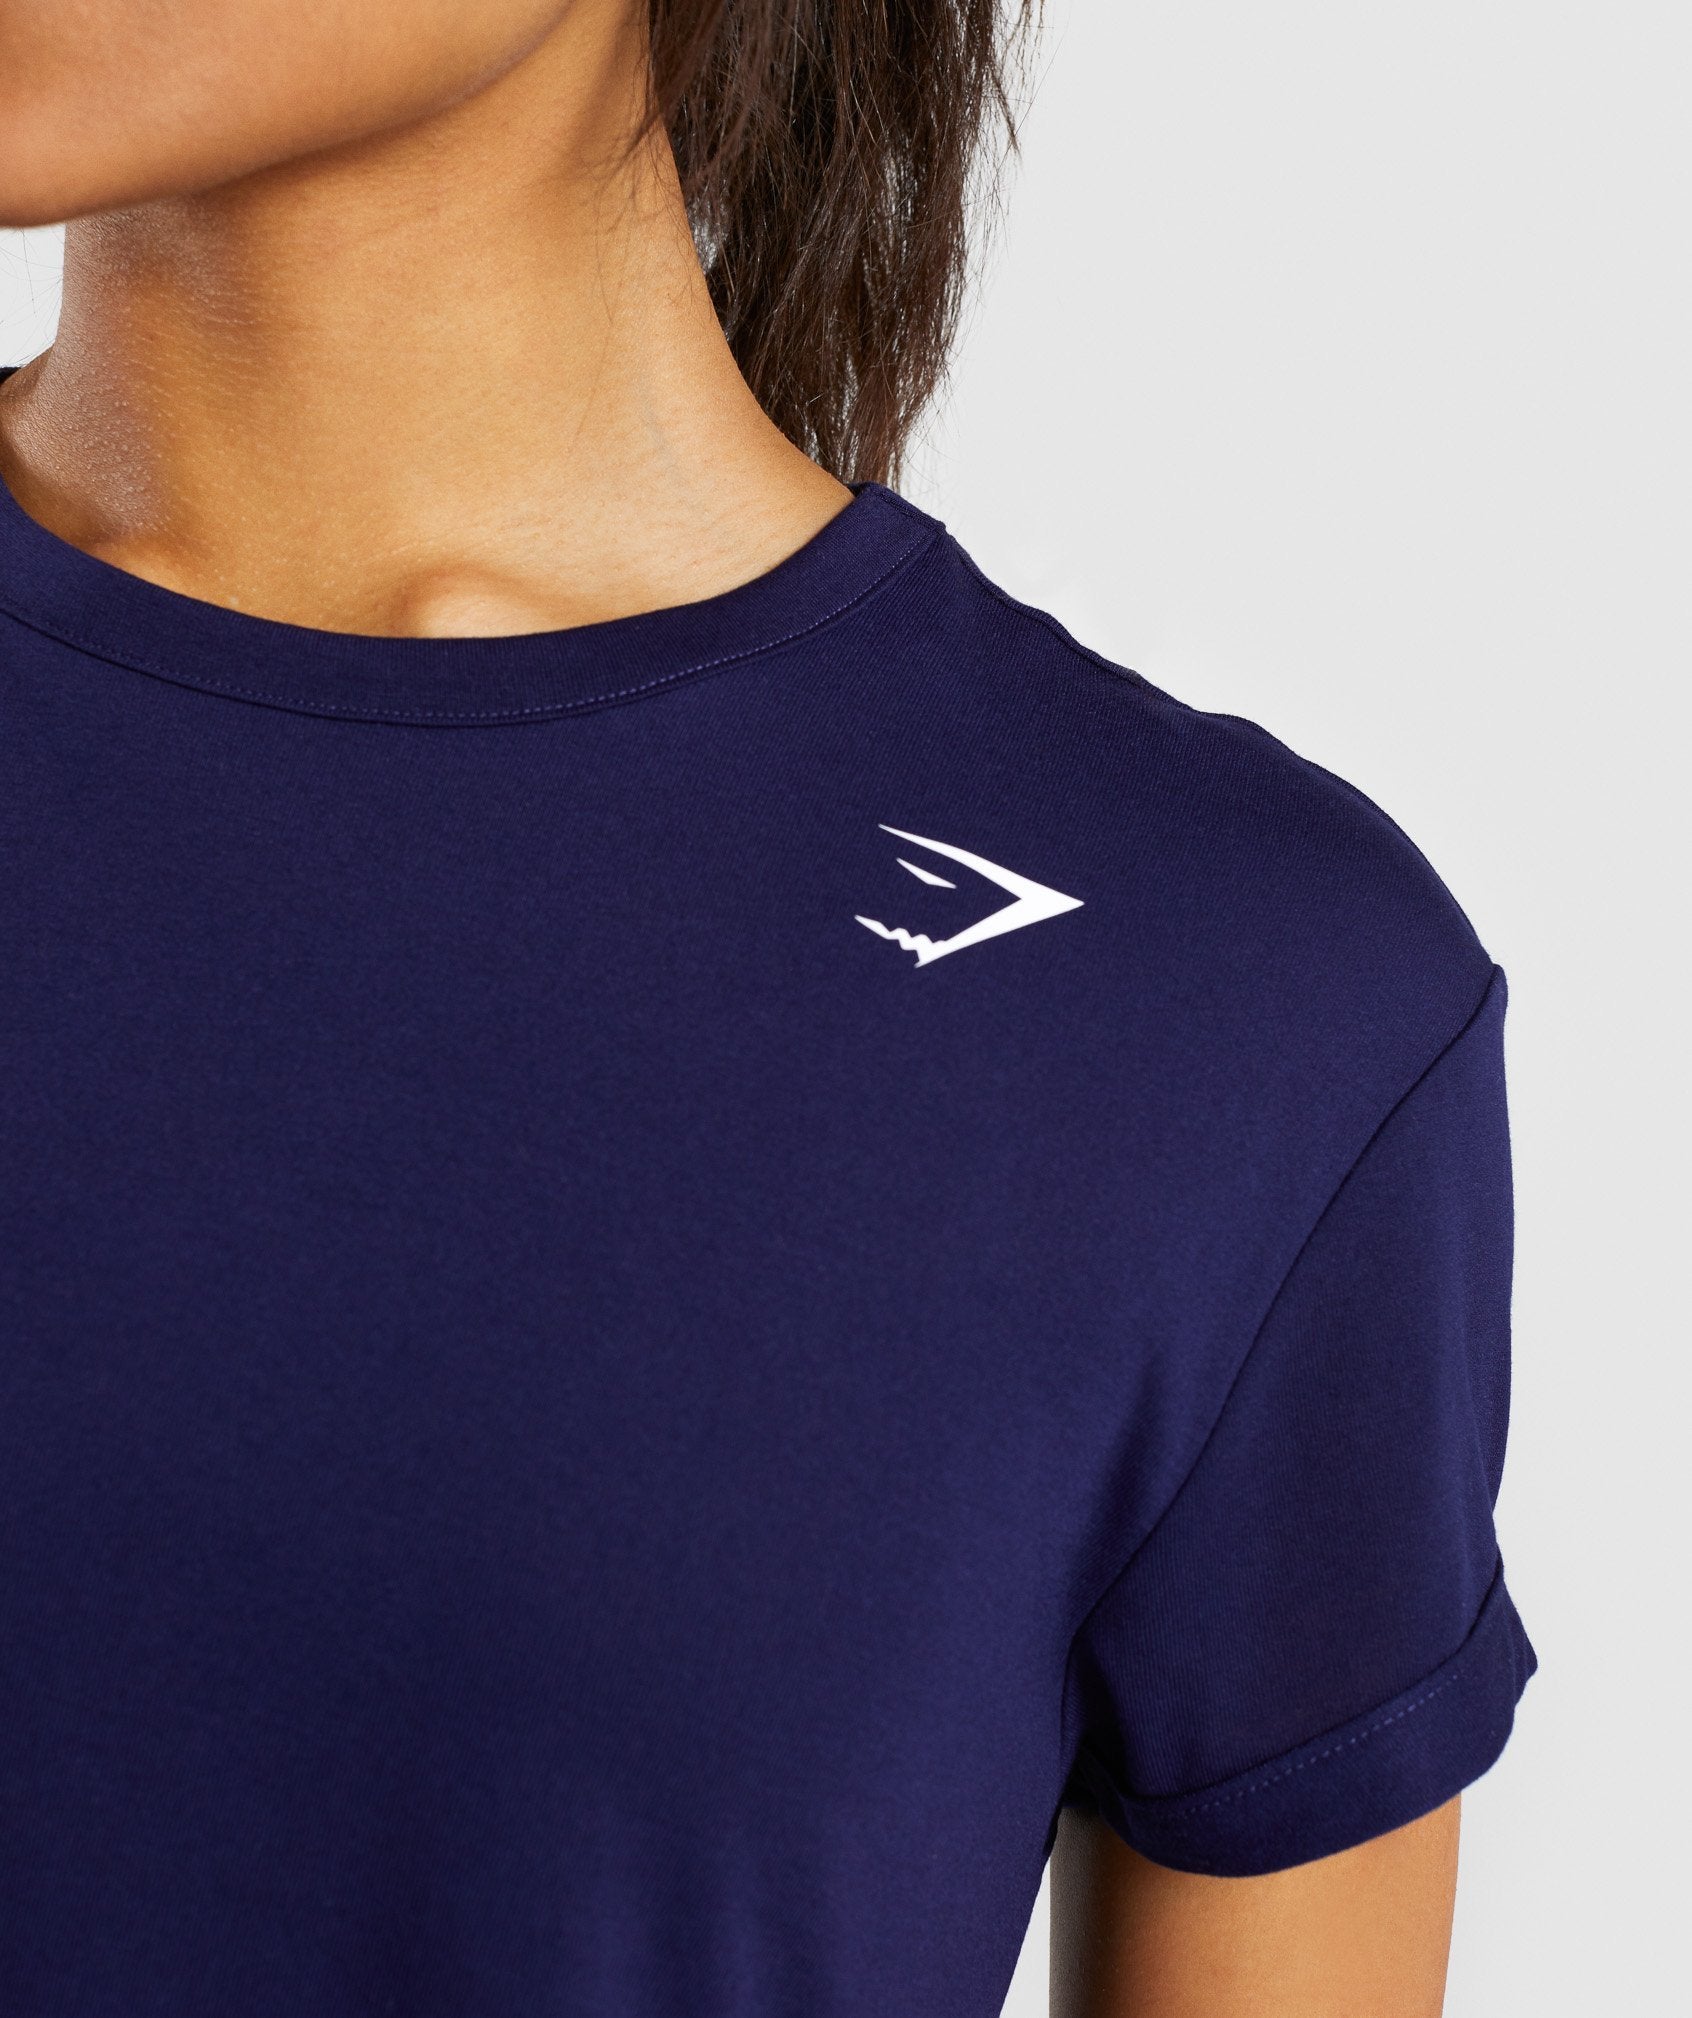 Essential Tee in Evening Navy Blue - view 6